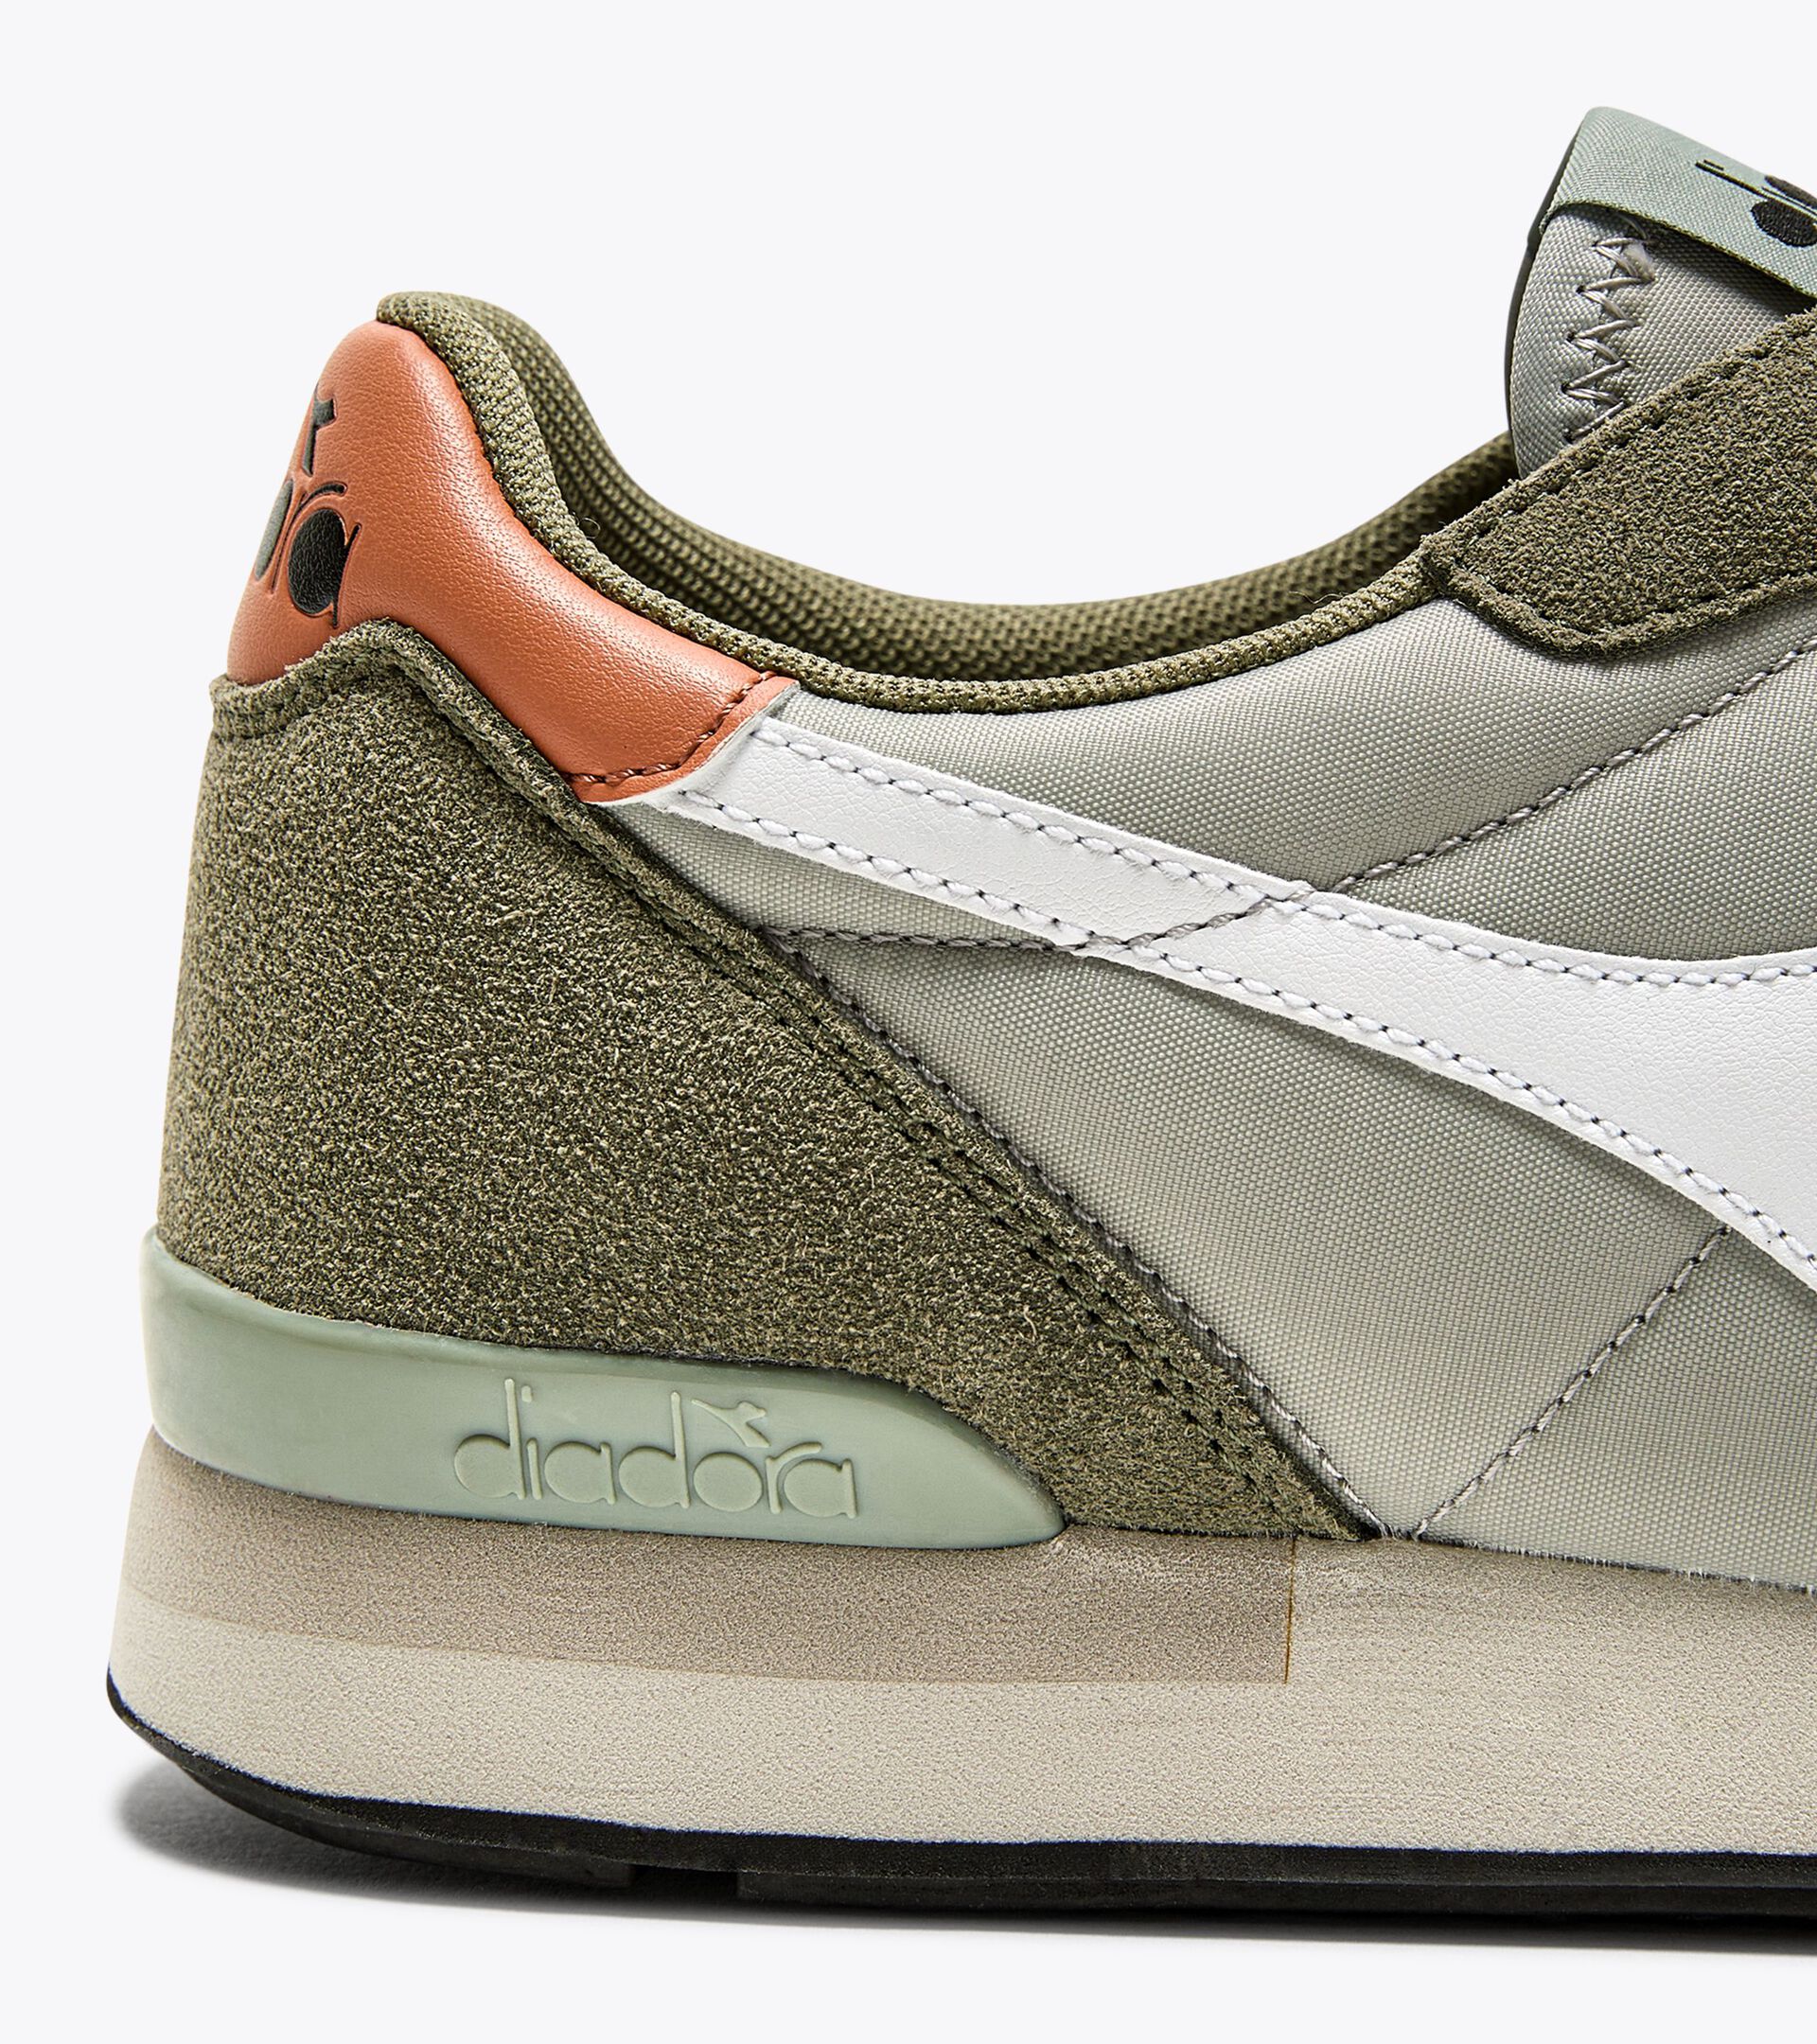 Sporty sneakers - Gender neutral CAMARO VETIVER/PUSSYWILLOW GRAY - Diadora